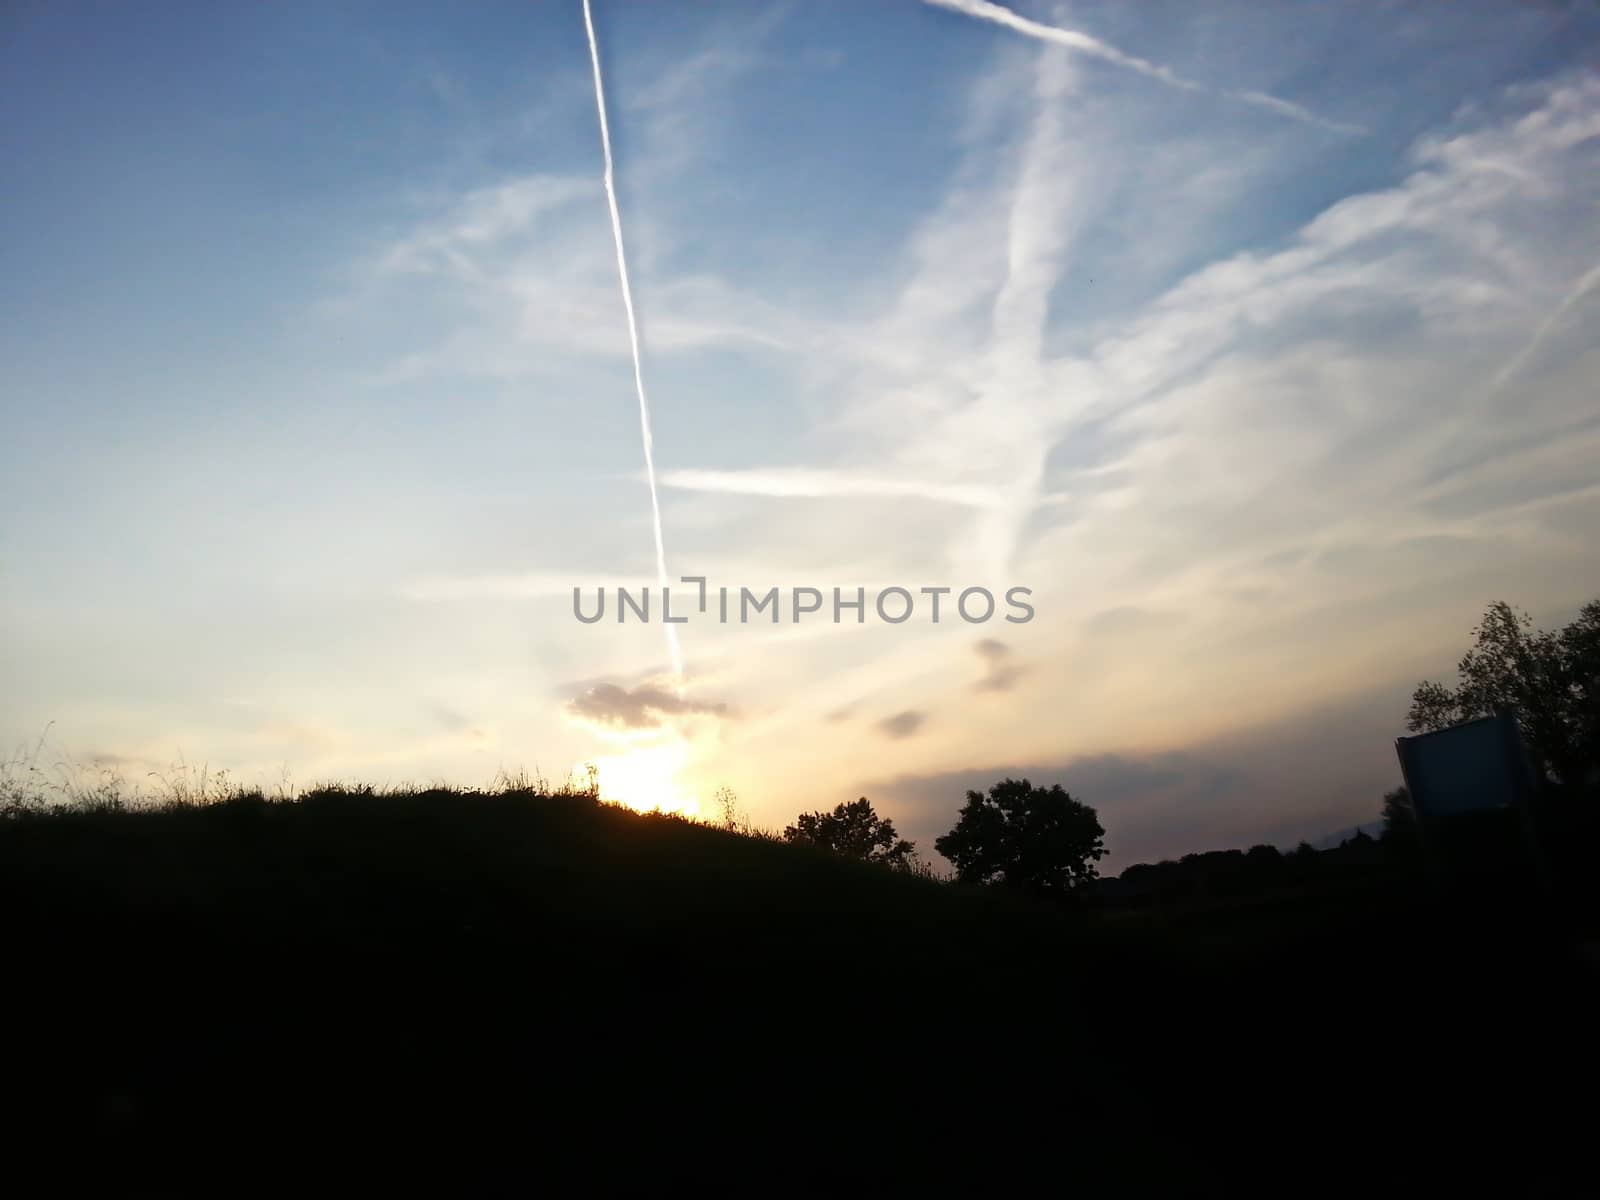 Beautiful sky trails in the backgroung with the foreground silhouette